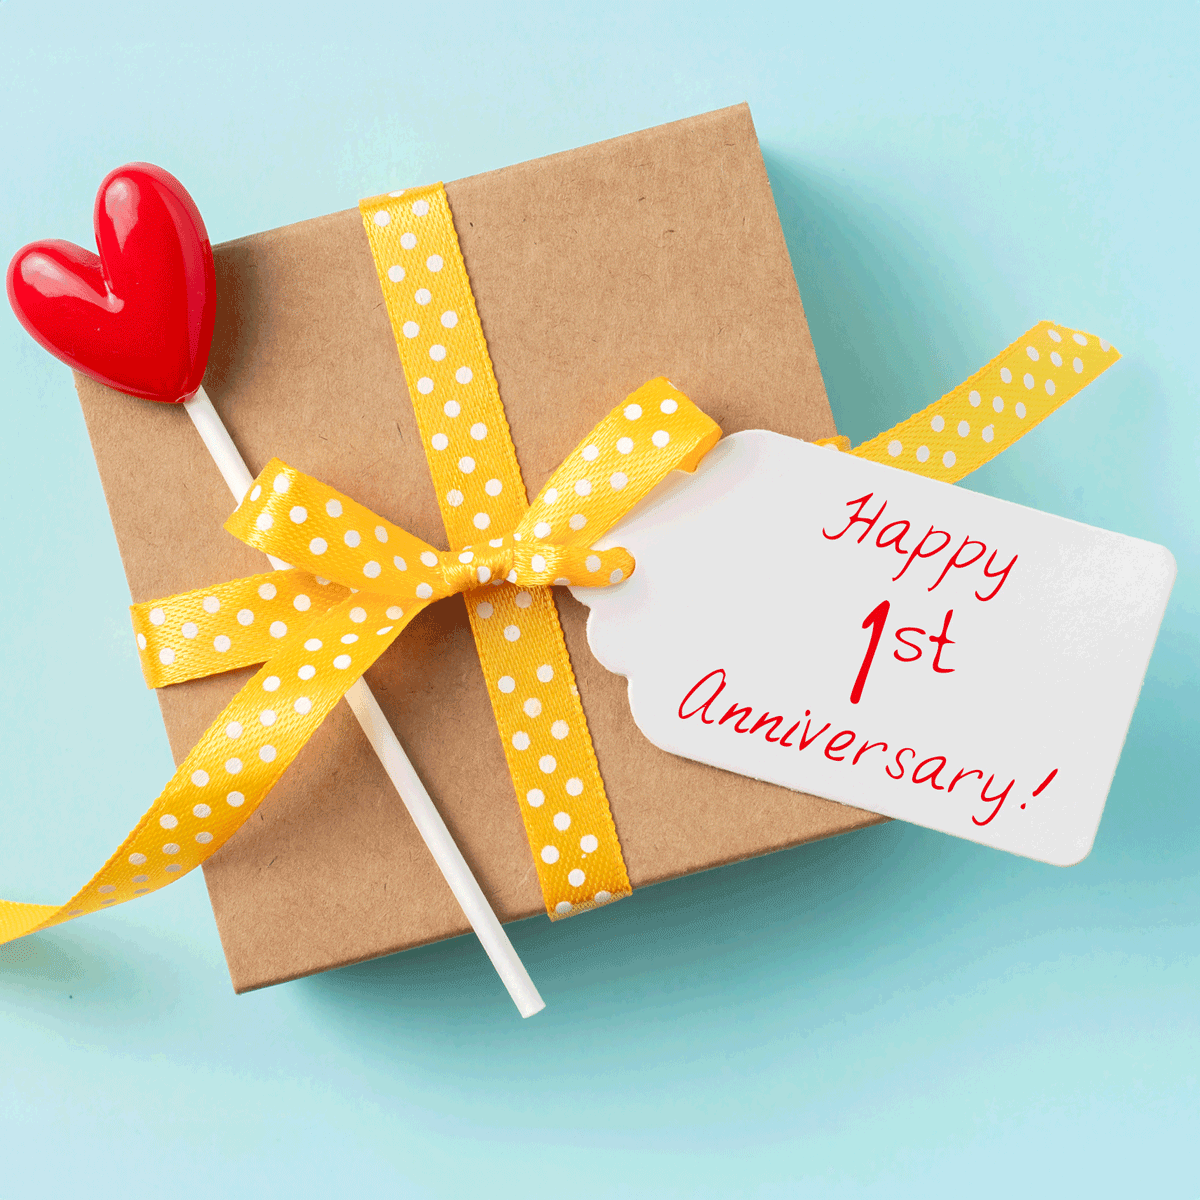 Traditional Anniversary Gifts by Year to Show Your Love